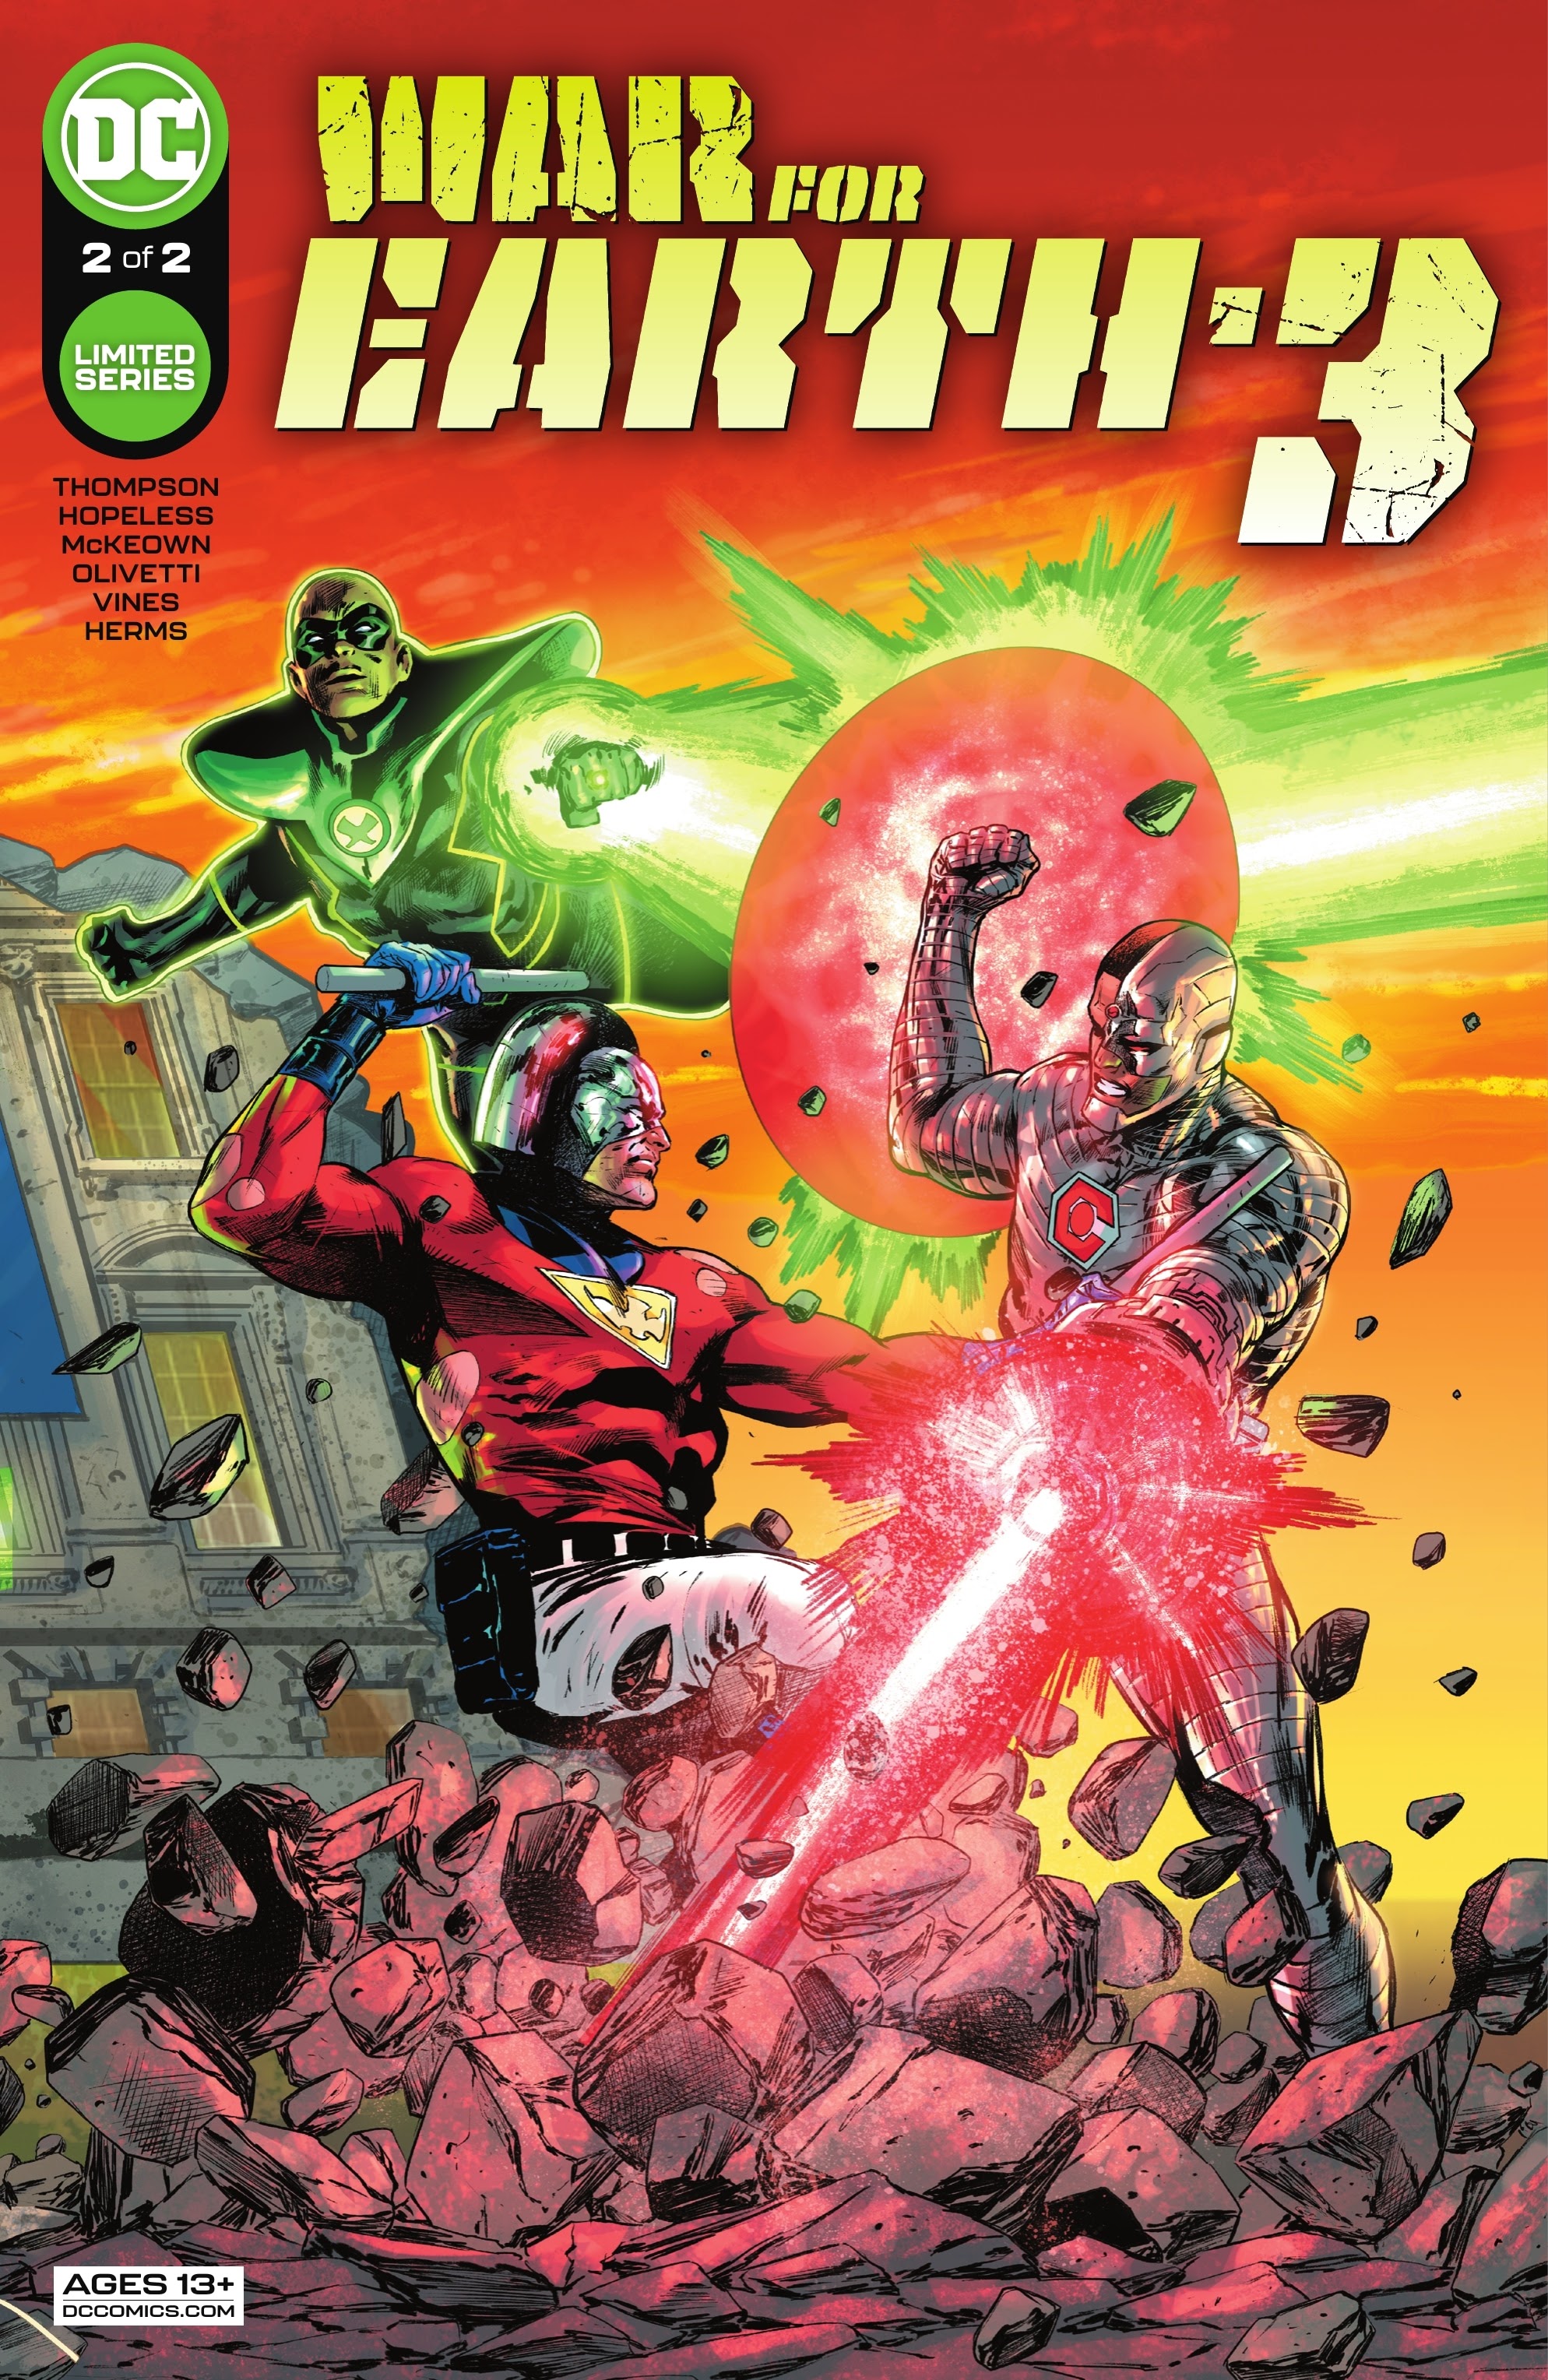 Read online War for Earth-3 comic -  Issue #2 - 1